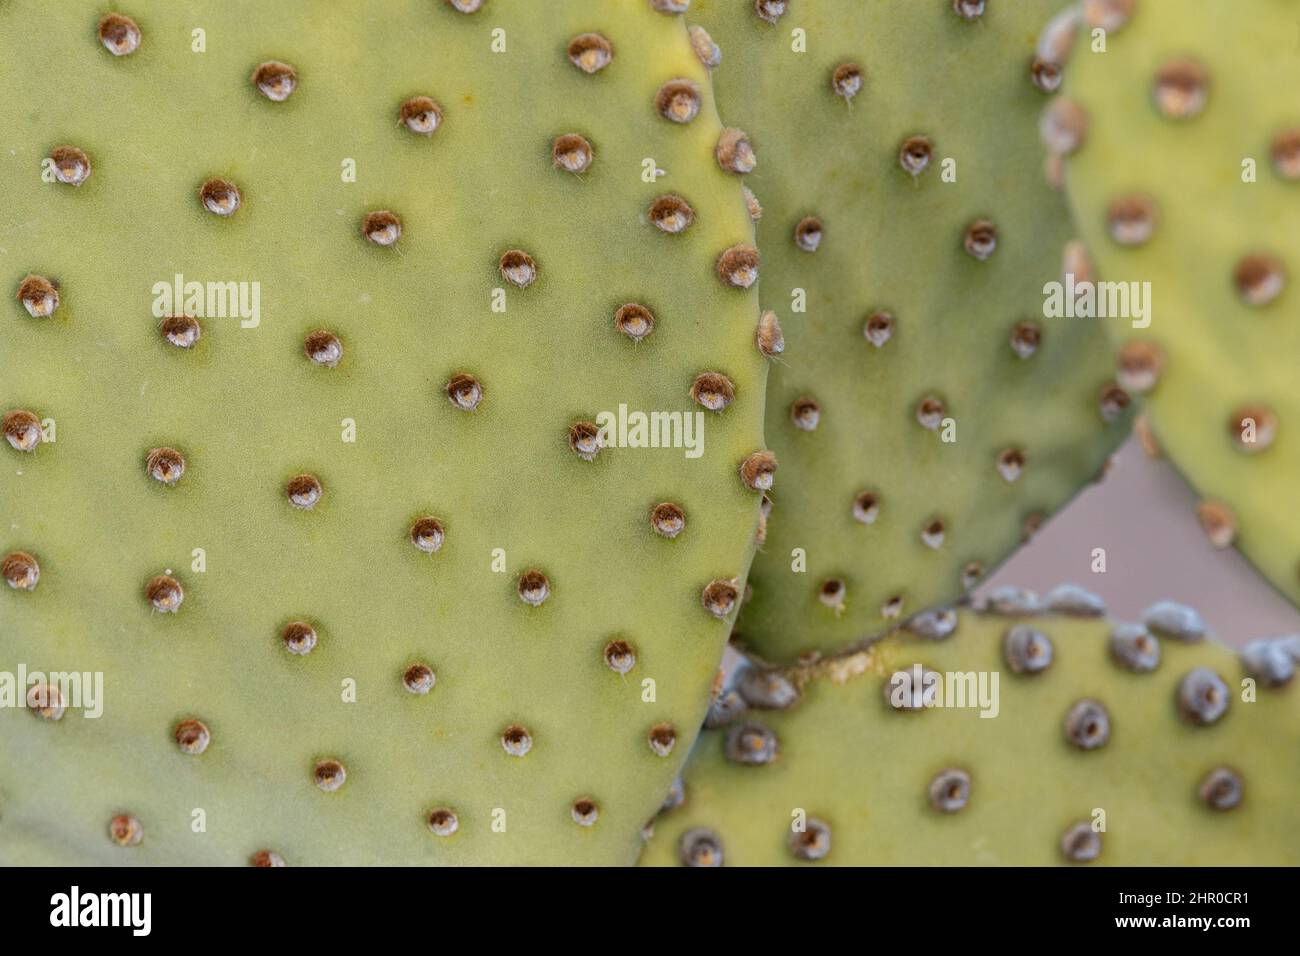 A close-up of the areoles with their fine glochids on the surface of a Blind Prickly Pear. Stock Photo